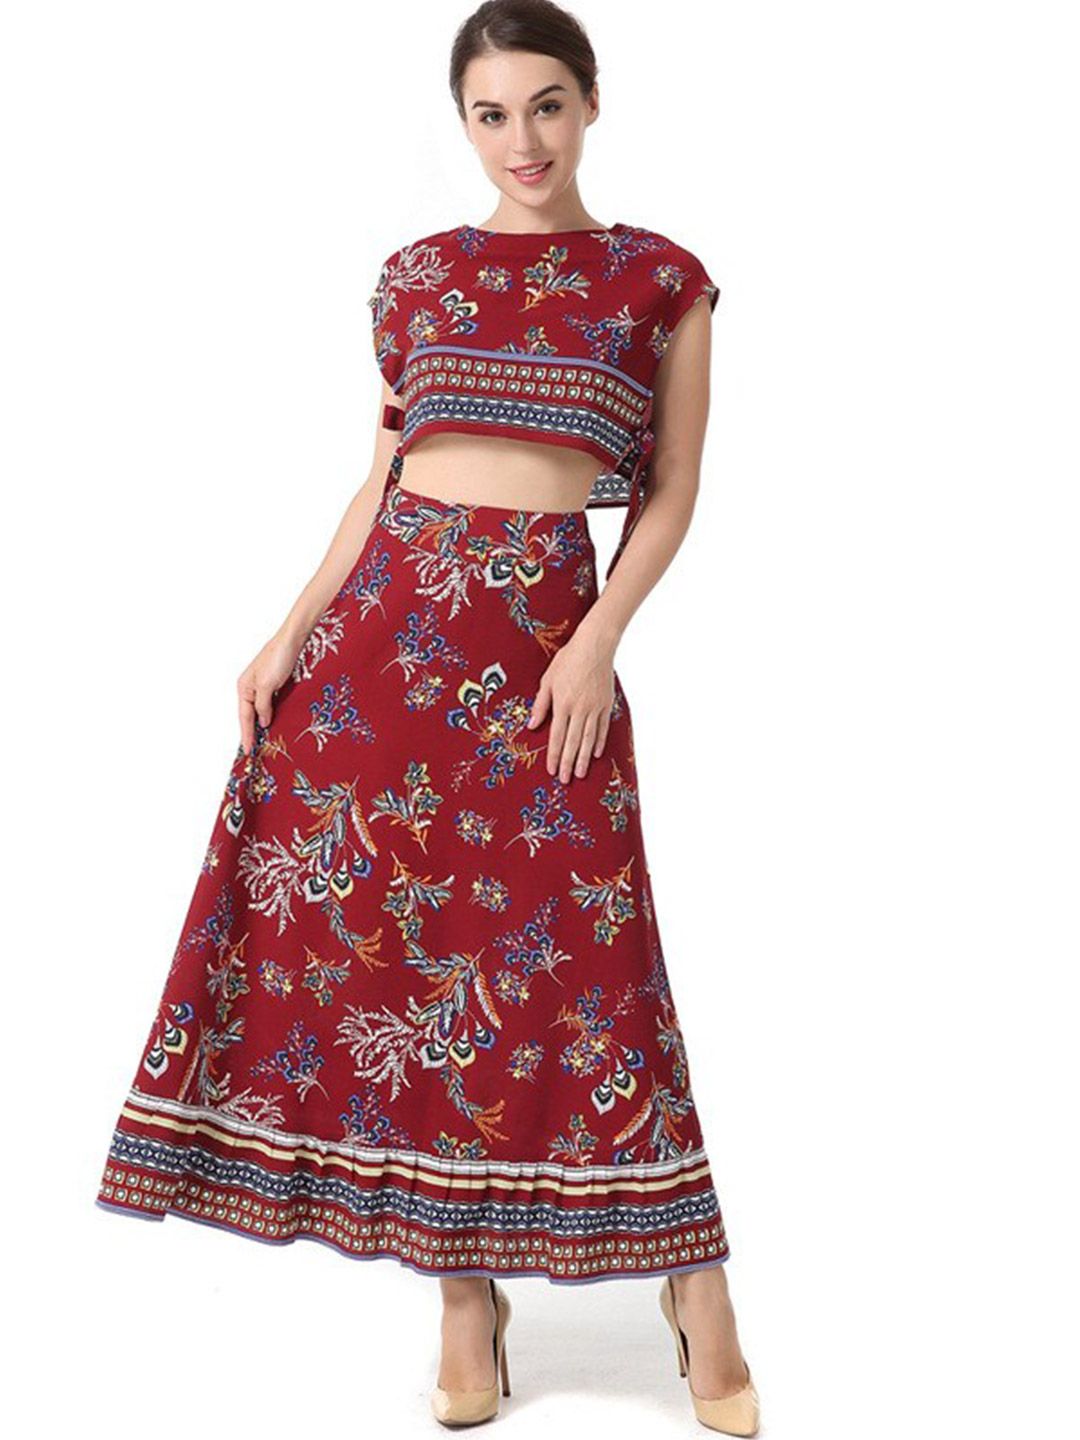 BoStreet Women Red Printed Top with Skirt Price in India